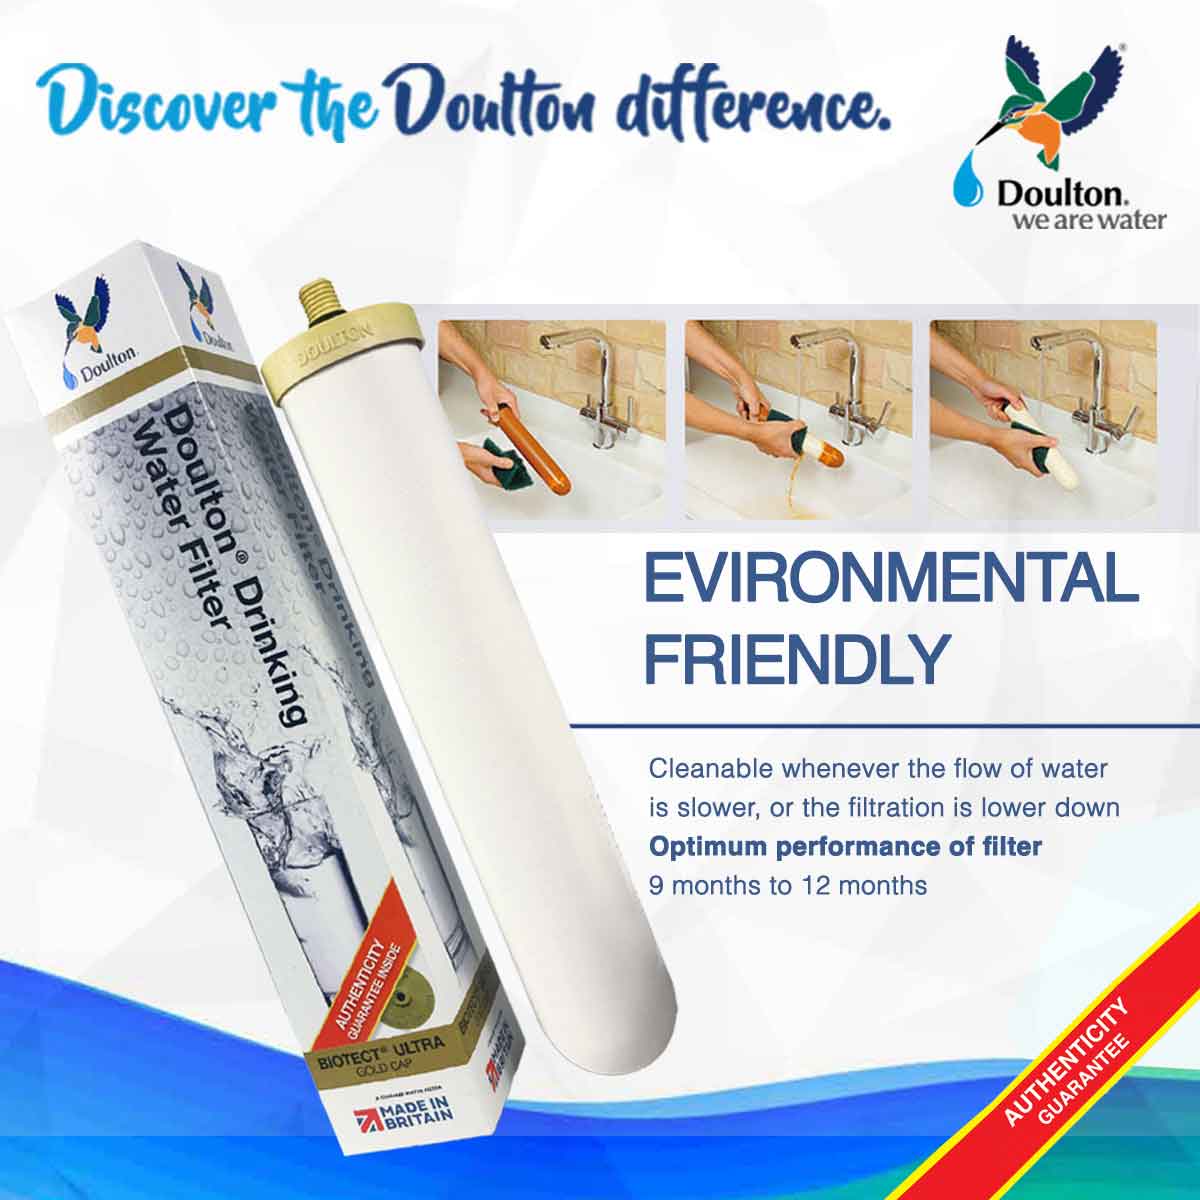 (FREE 1 eXtra BTU Filter, 2nd Year) Experience Ultimate Purity with Doulton DBS Biotect Ultra: The Pinnacle of Eco-Friendly, 4-Stage Advanced Filtration - Crafted with Excellence in Britain! since 1826